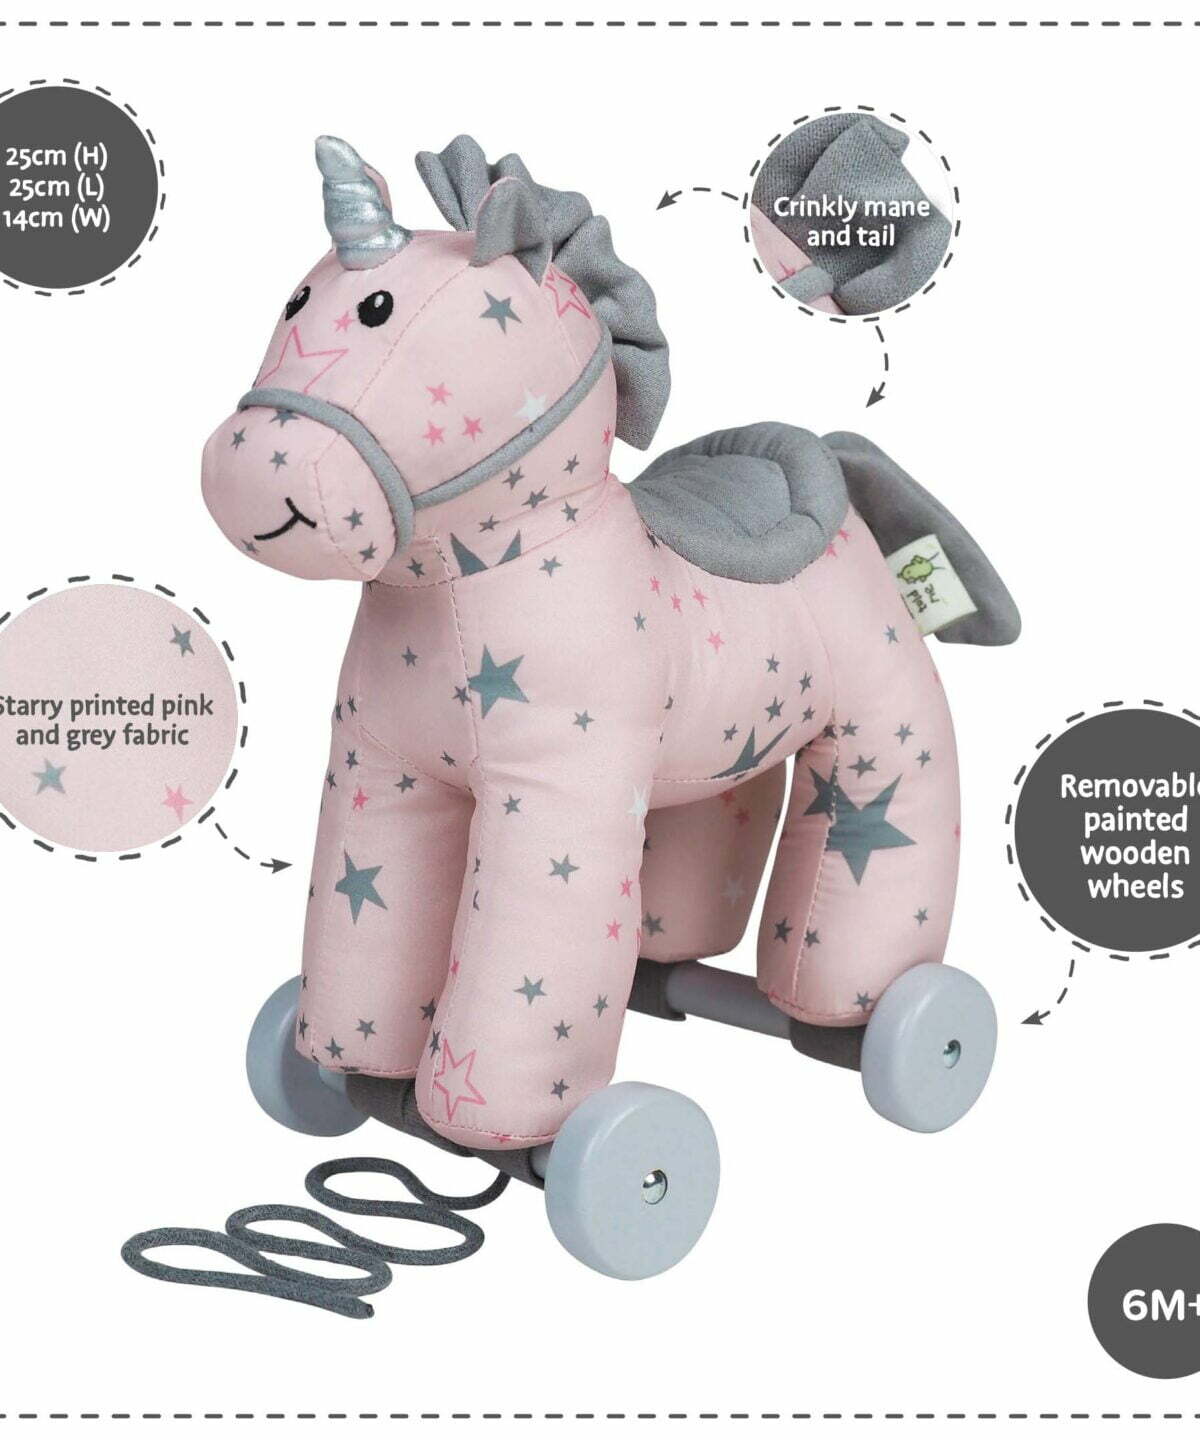 Features and benefits displayed for Celeste Unicorn Pull Along Toy